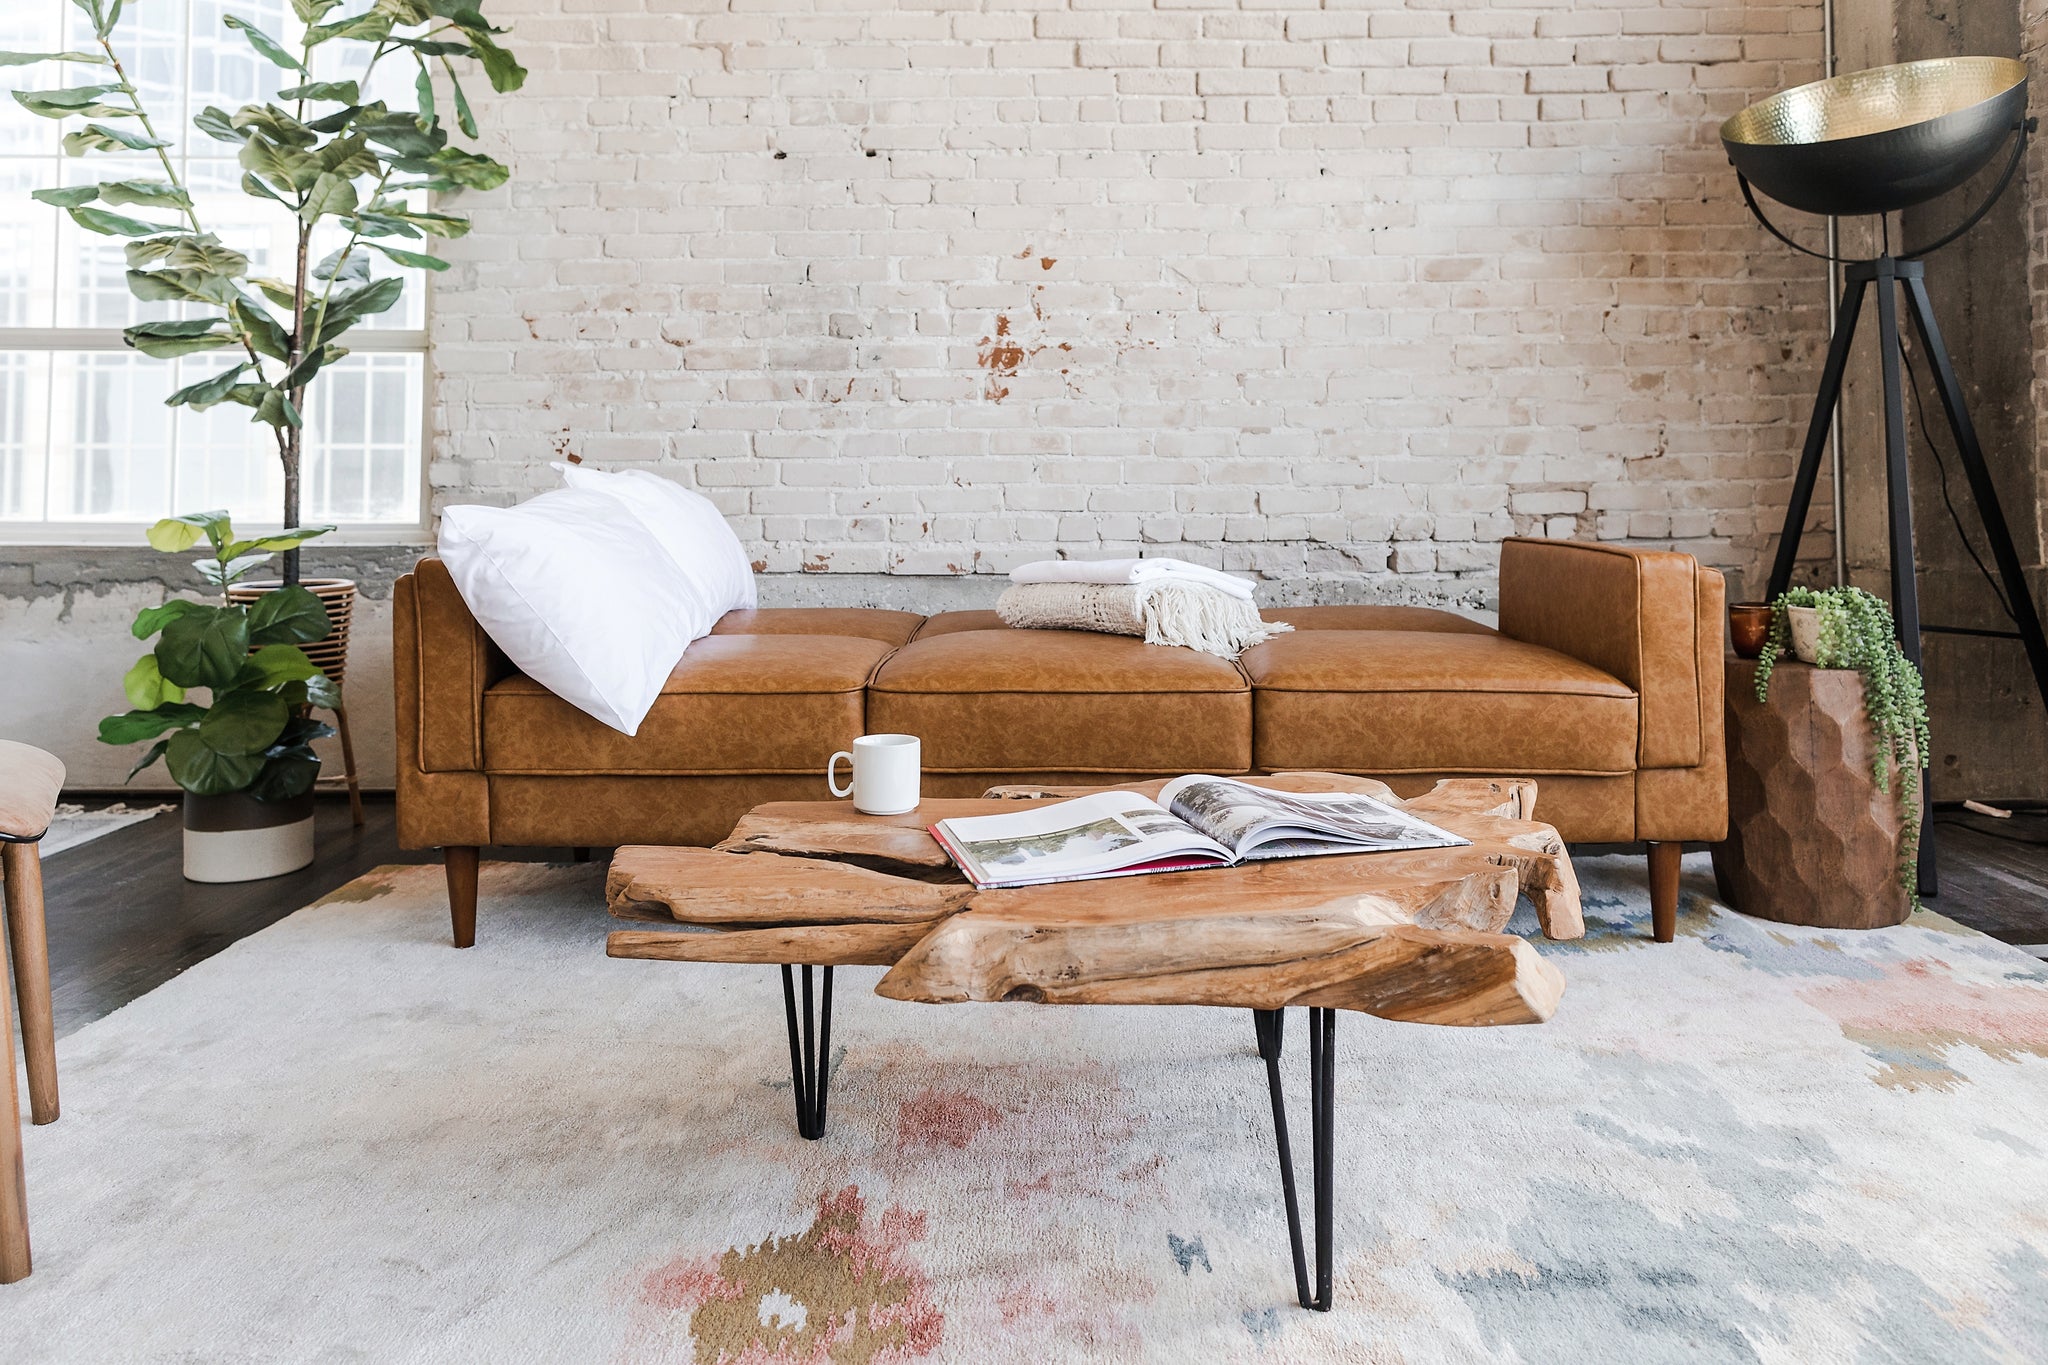 albany sleeper sofa in vegan leather with walnut legs in a living room setting